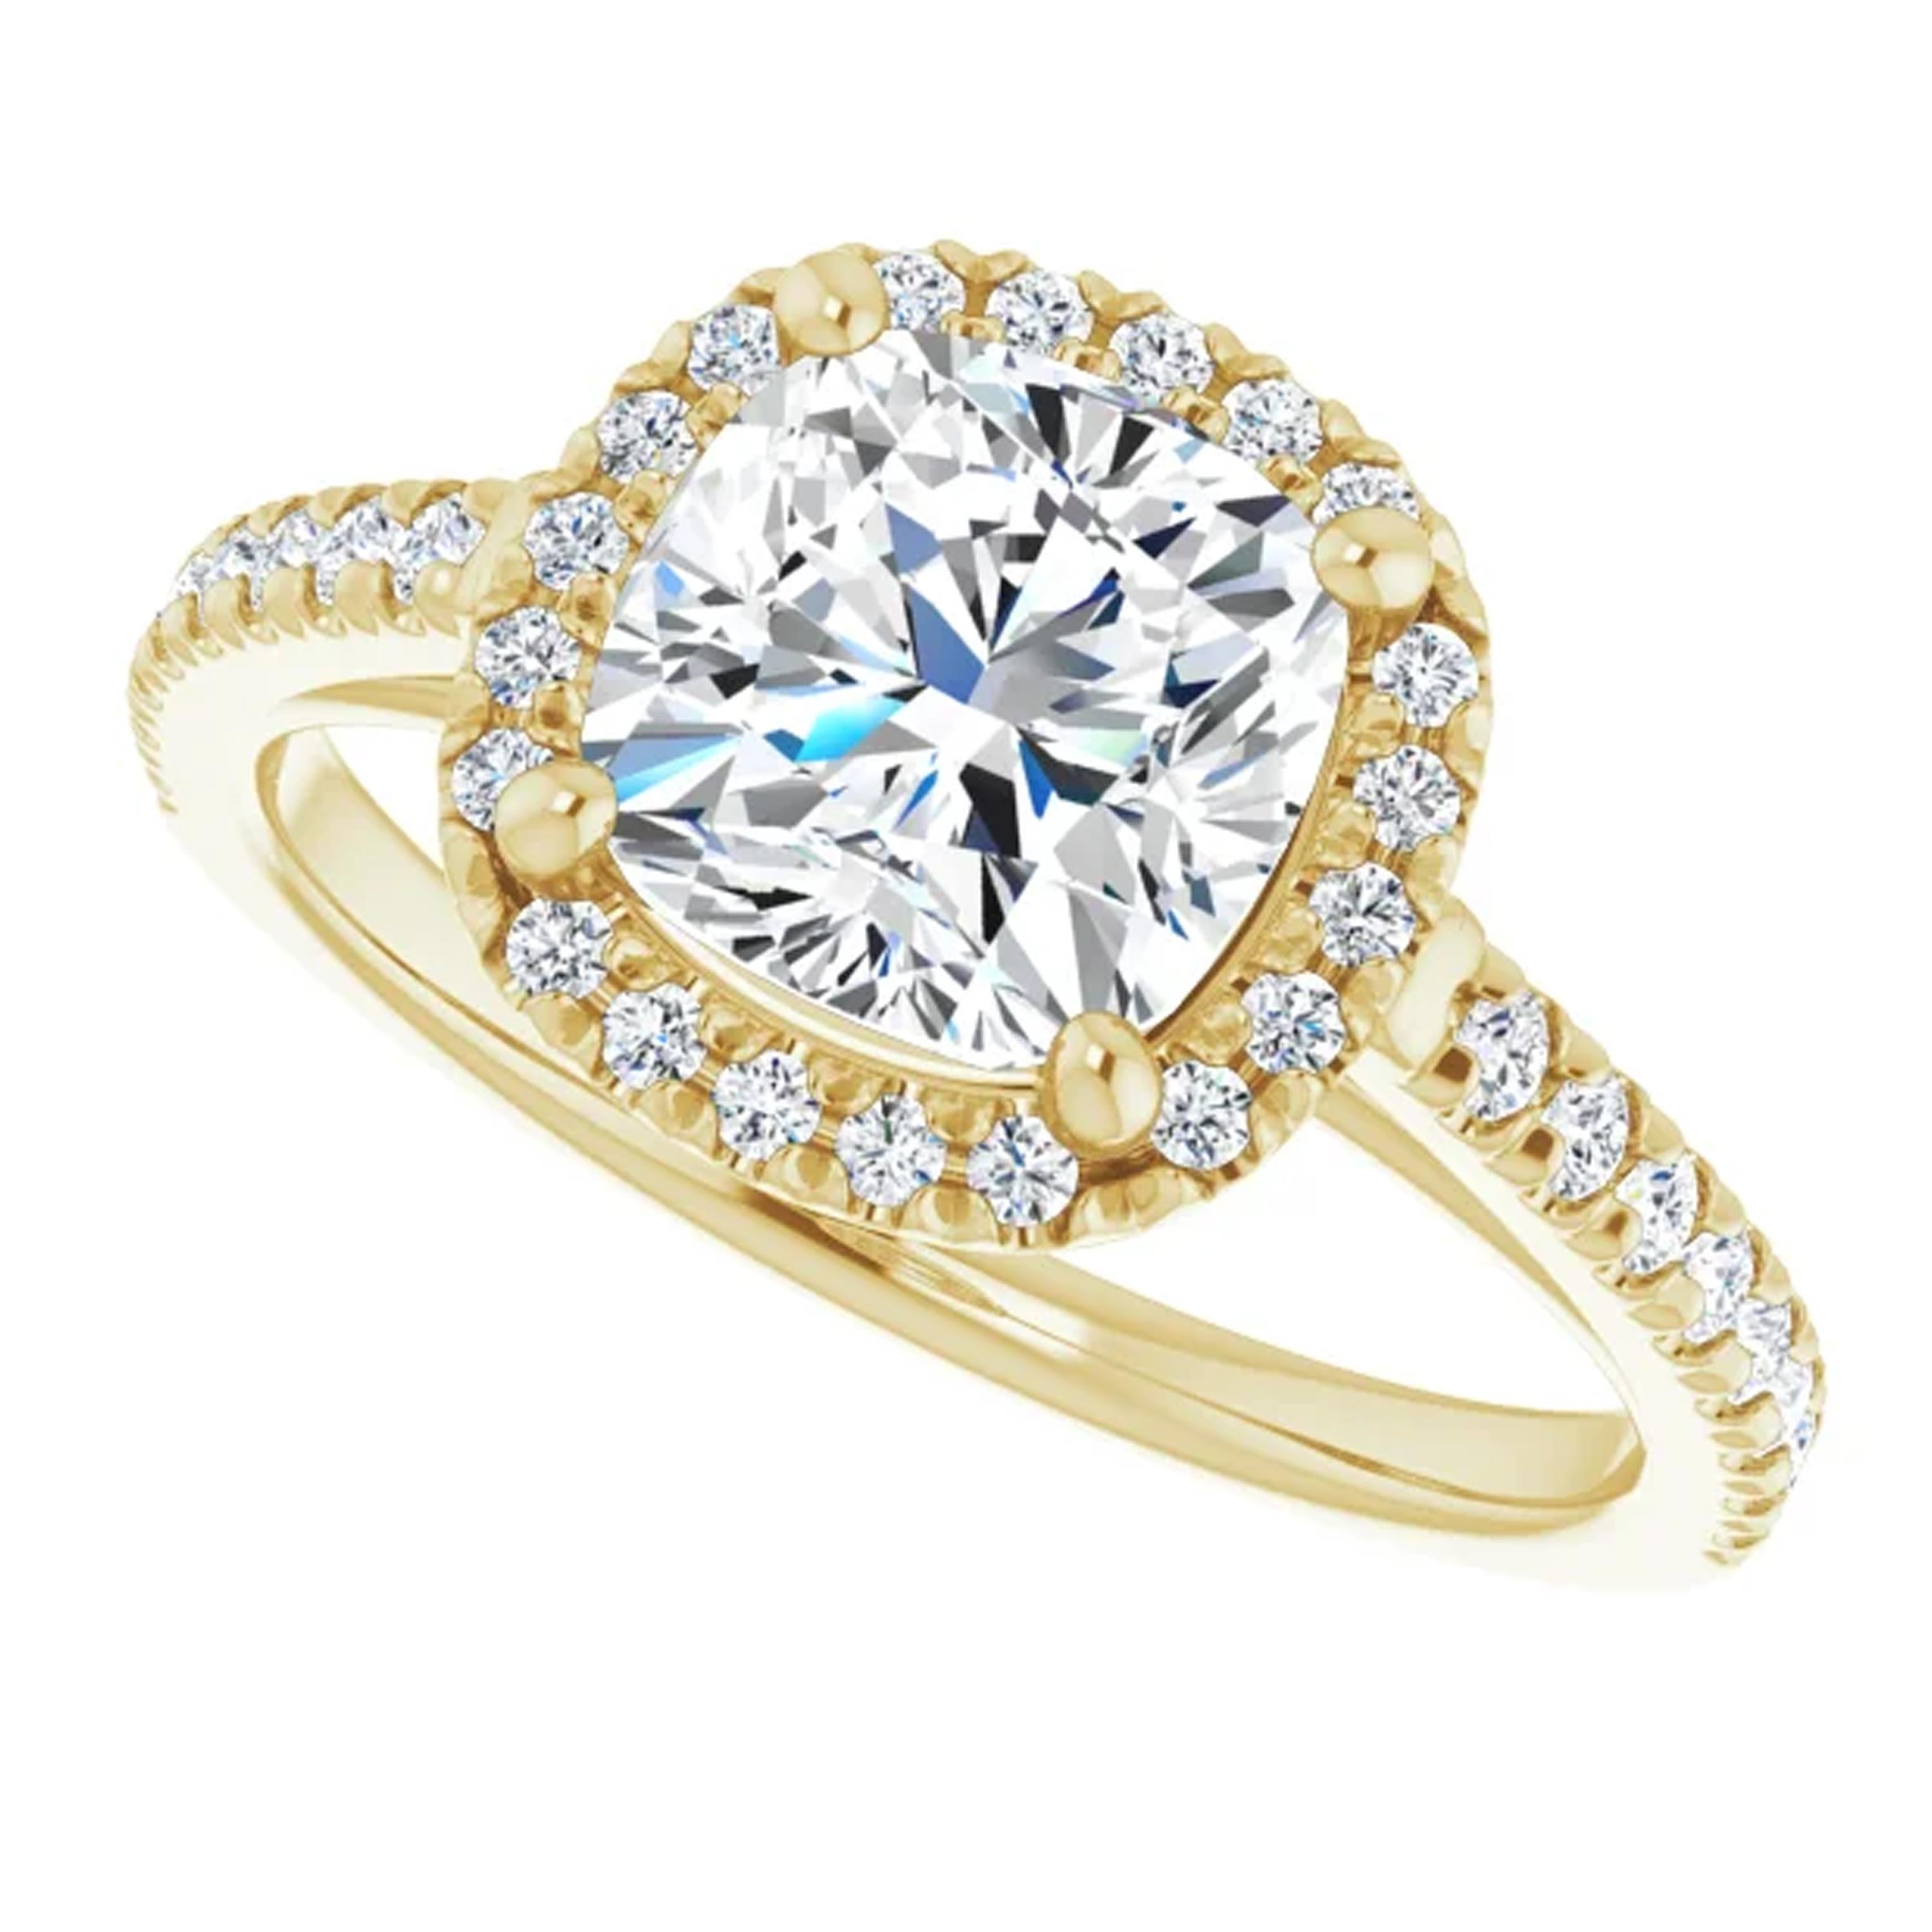 French Pave Halo Cushion Diamond Engagement Ring Yellow Gold In New Condition For Sale In Los Angeles, CA